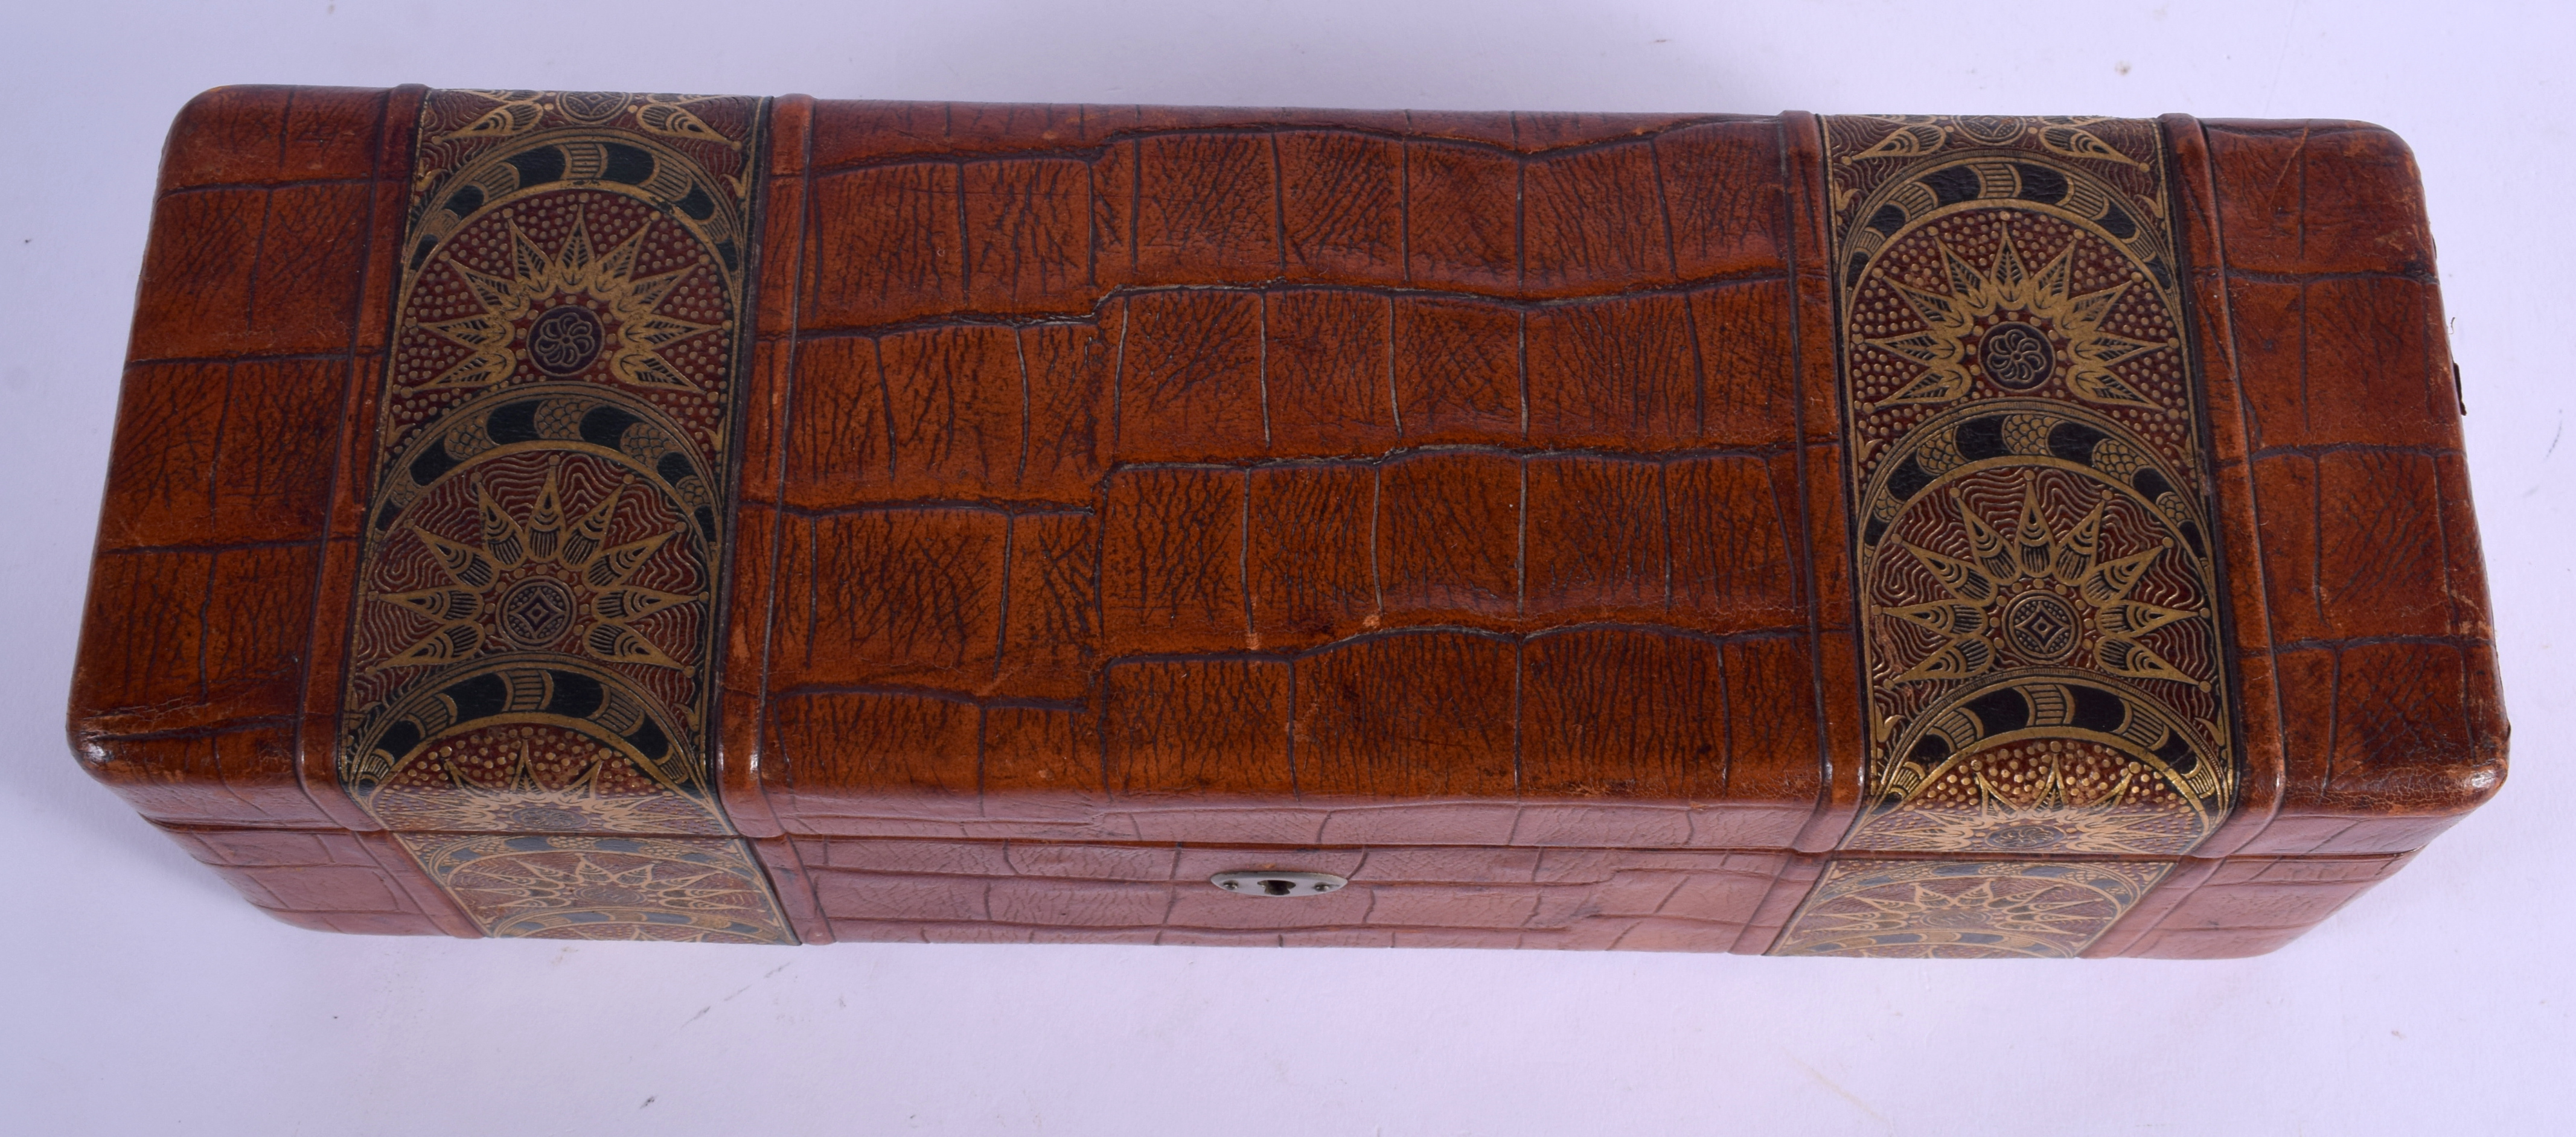 AN EARLY 20TH CENTURY CONTINENTAL LEATHER BOX with secessionist inspired decoration. 30 cm x 9 cm. - Image 3 of 5